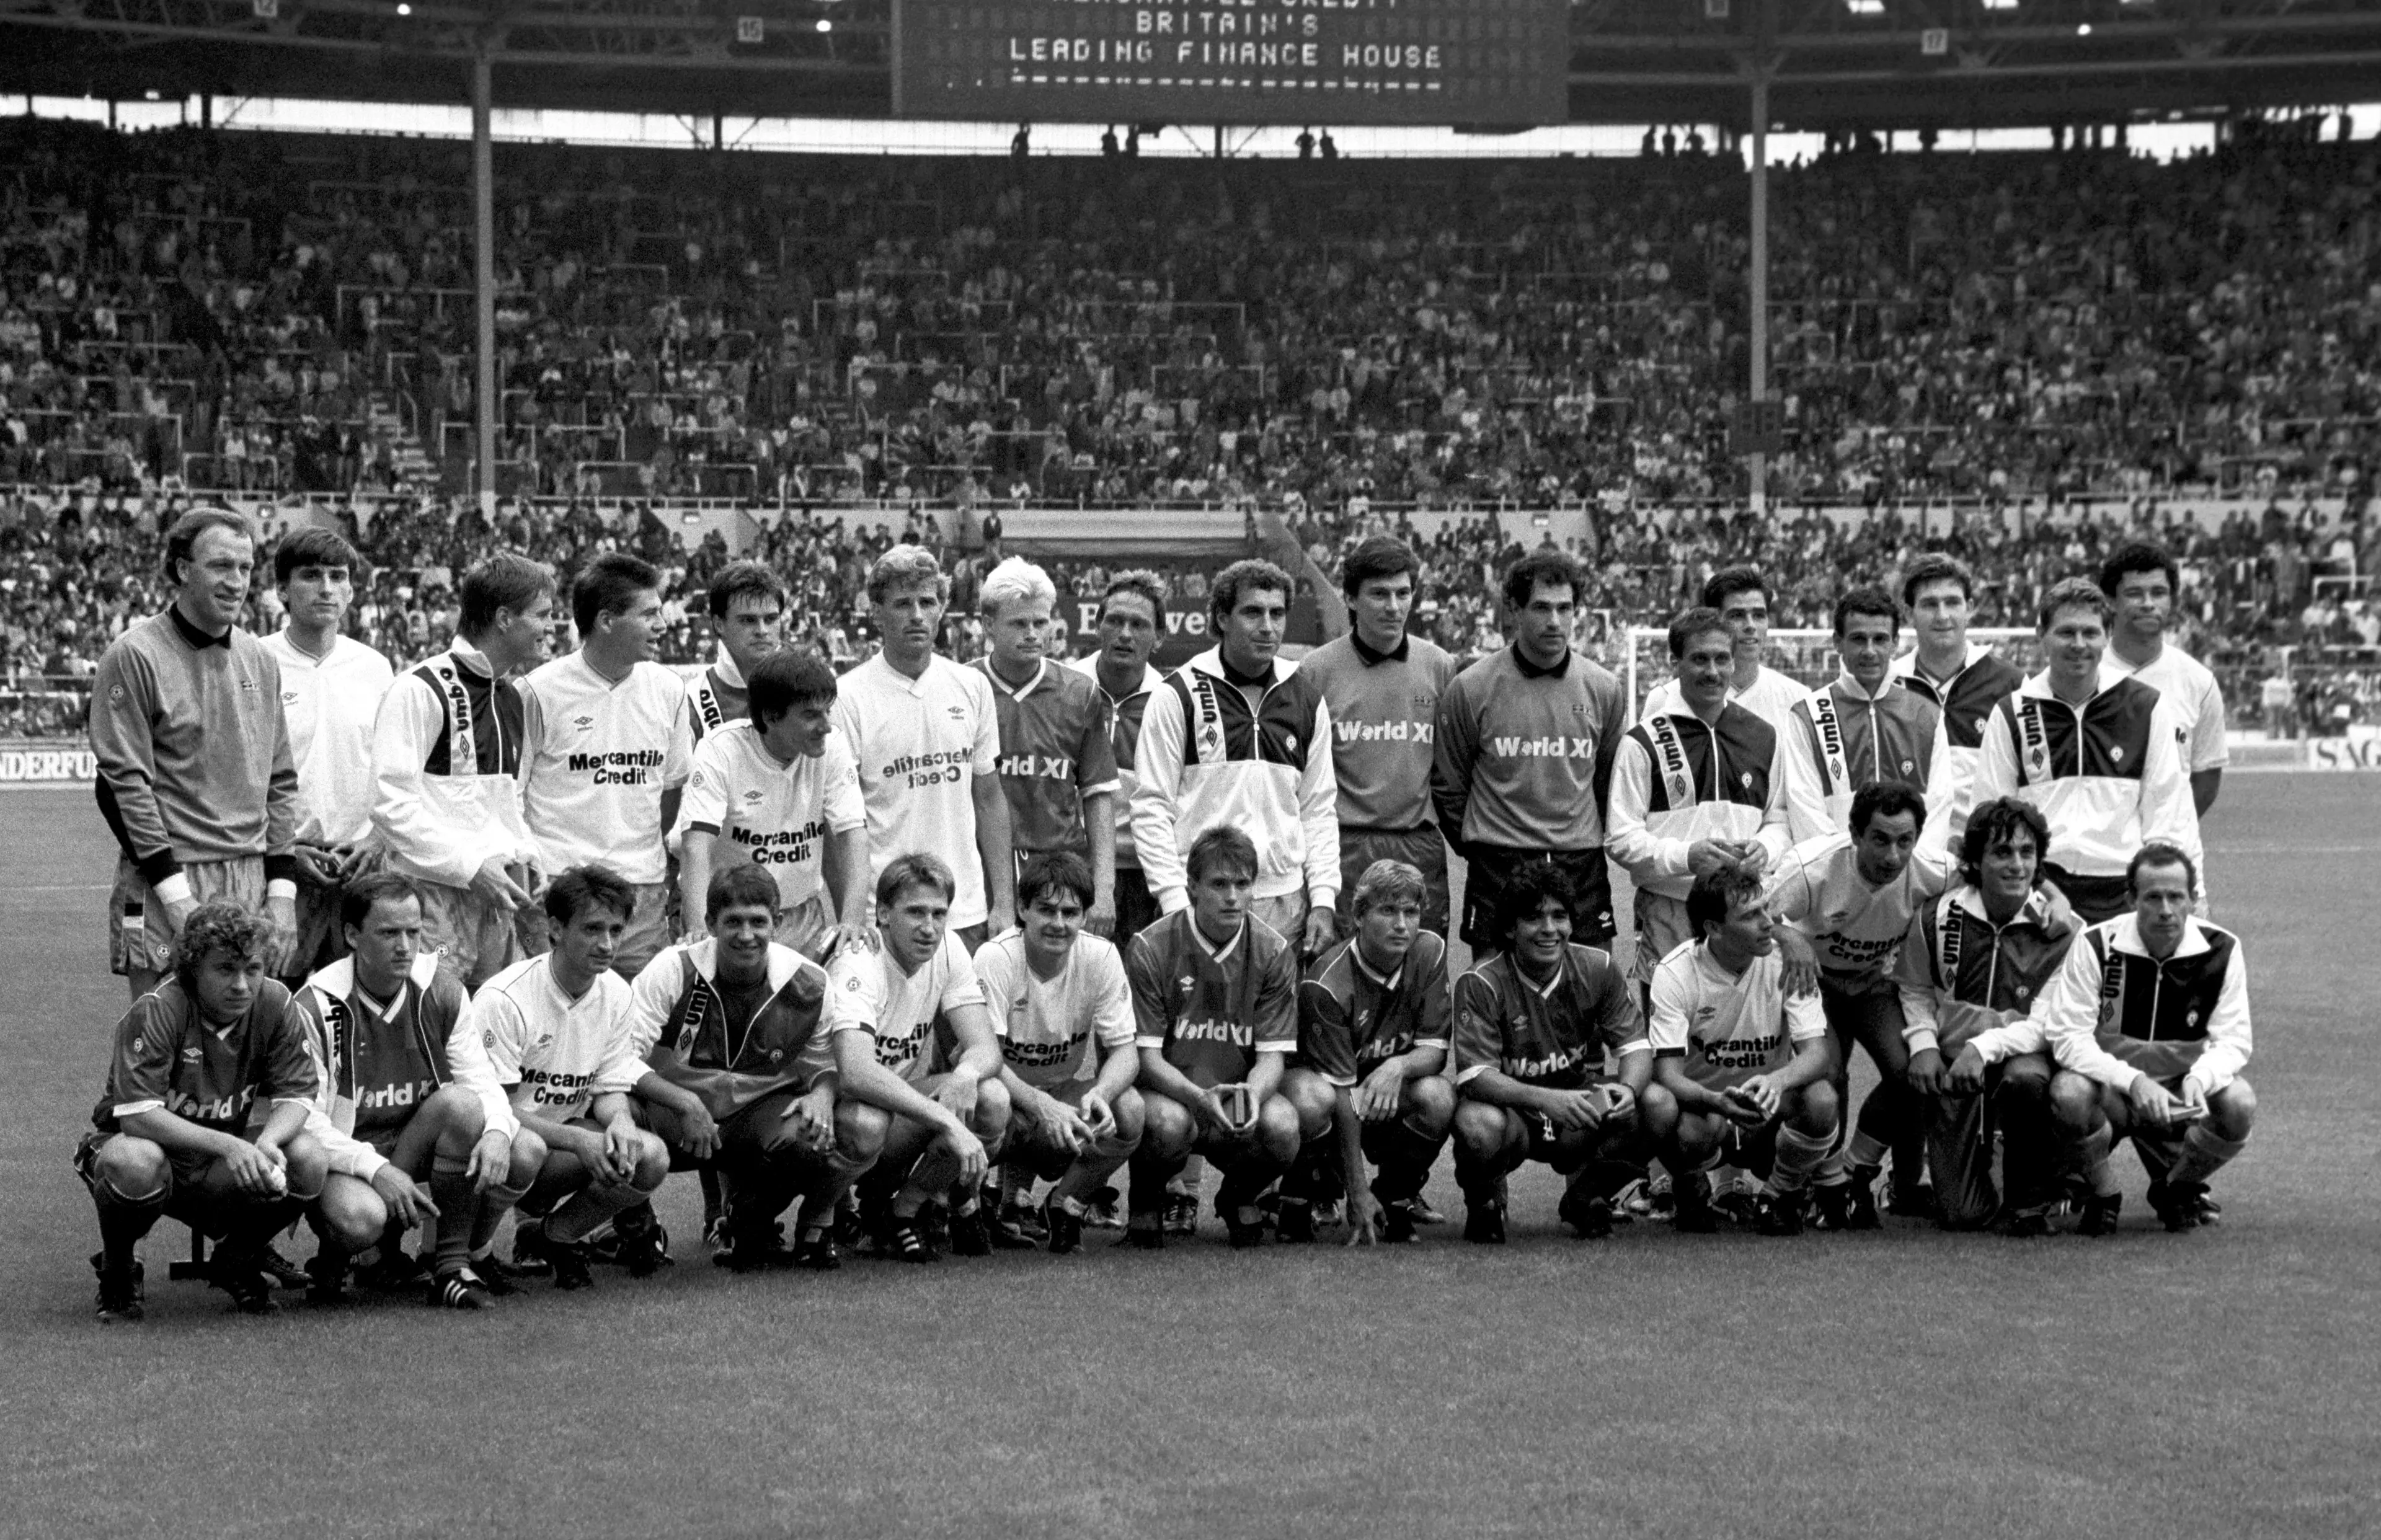 The two sides pose ahead of the Football League Centenary Match at Wembley Stadium. Maradona is pictured in the bottom row towards the right.